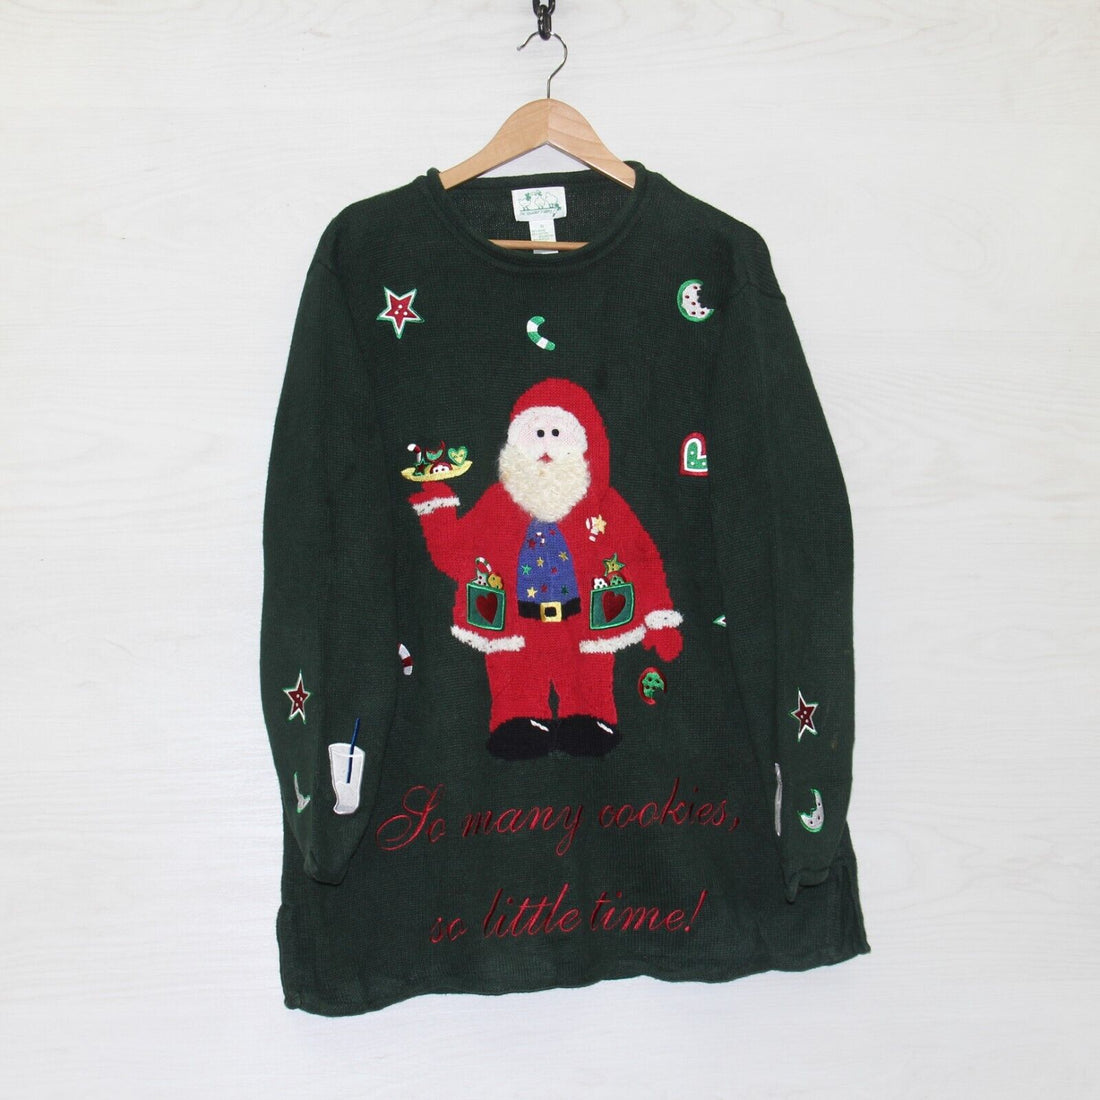 Vintage Santa Clause Christmas Knit Crewneck Sweater Size 1X Embroidered